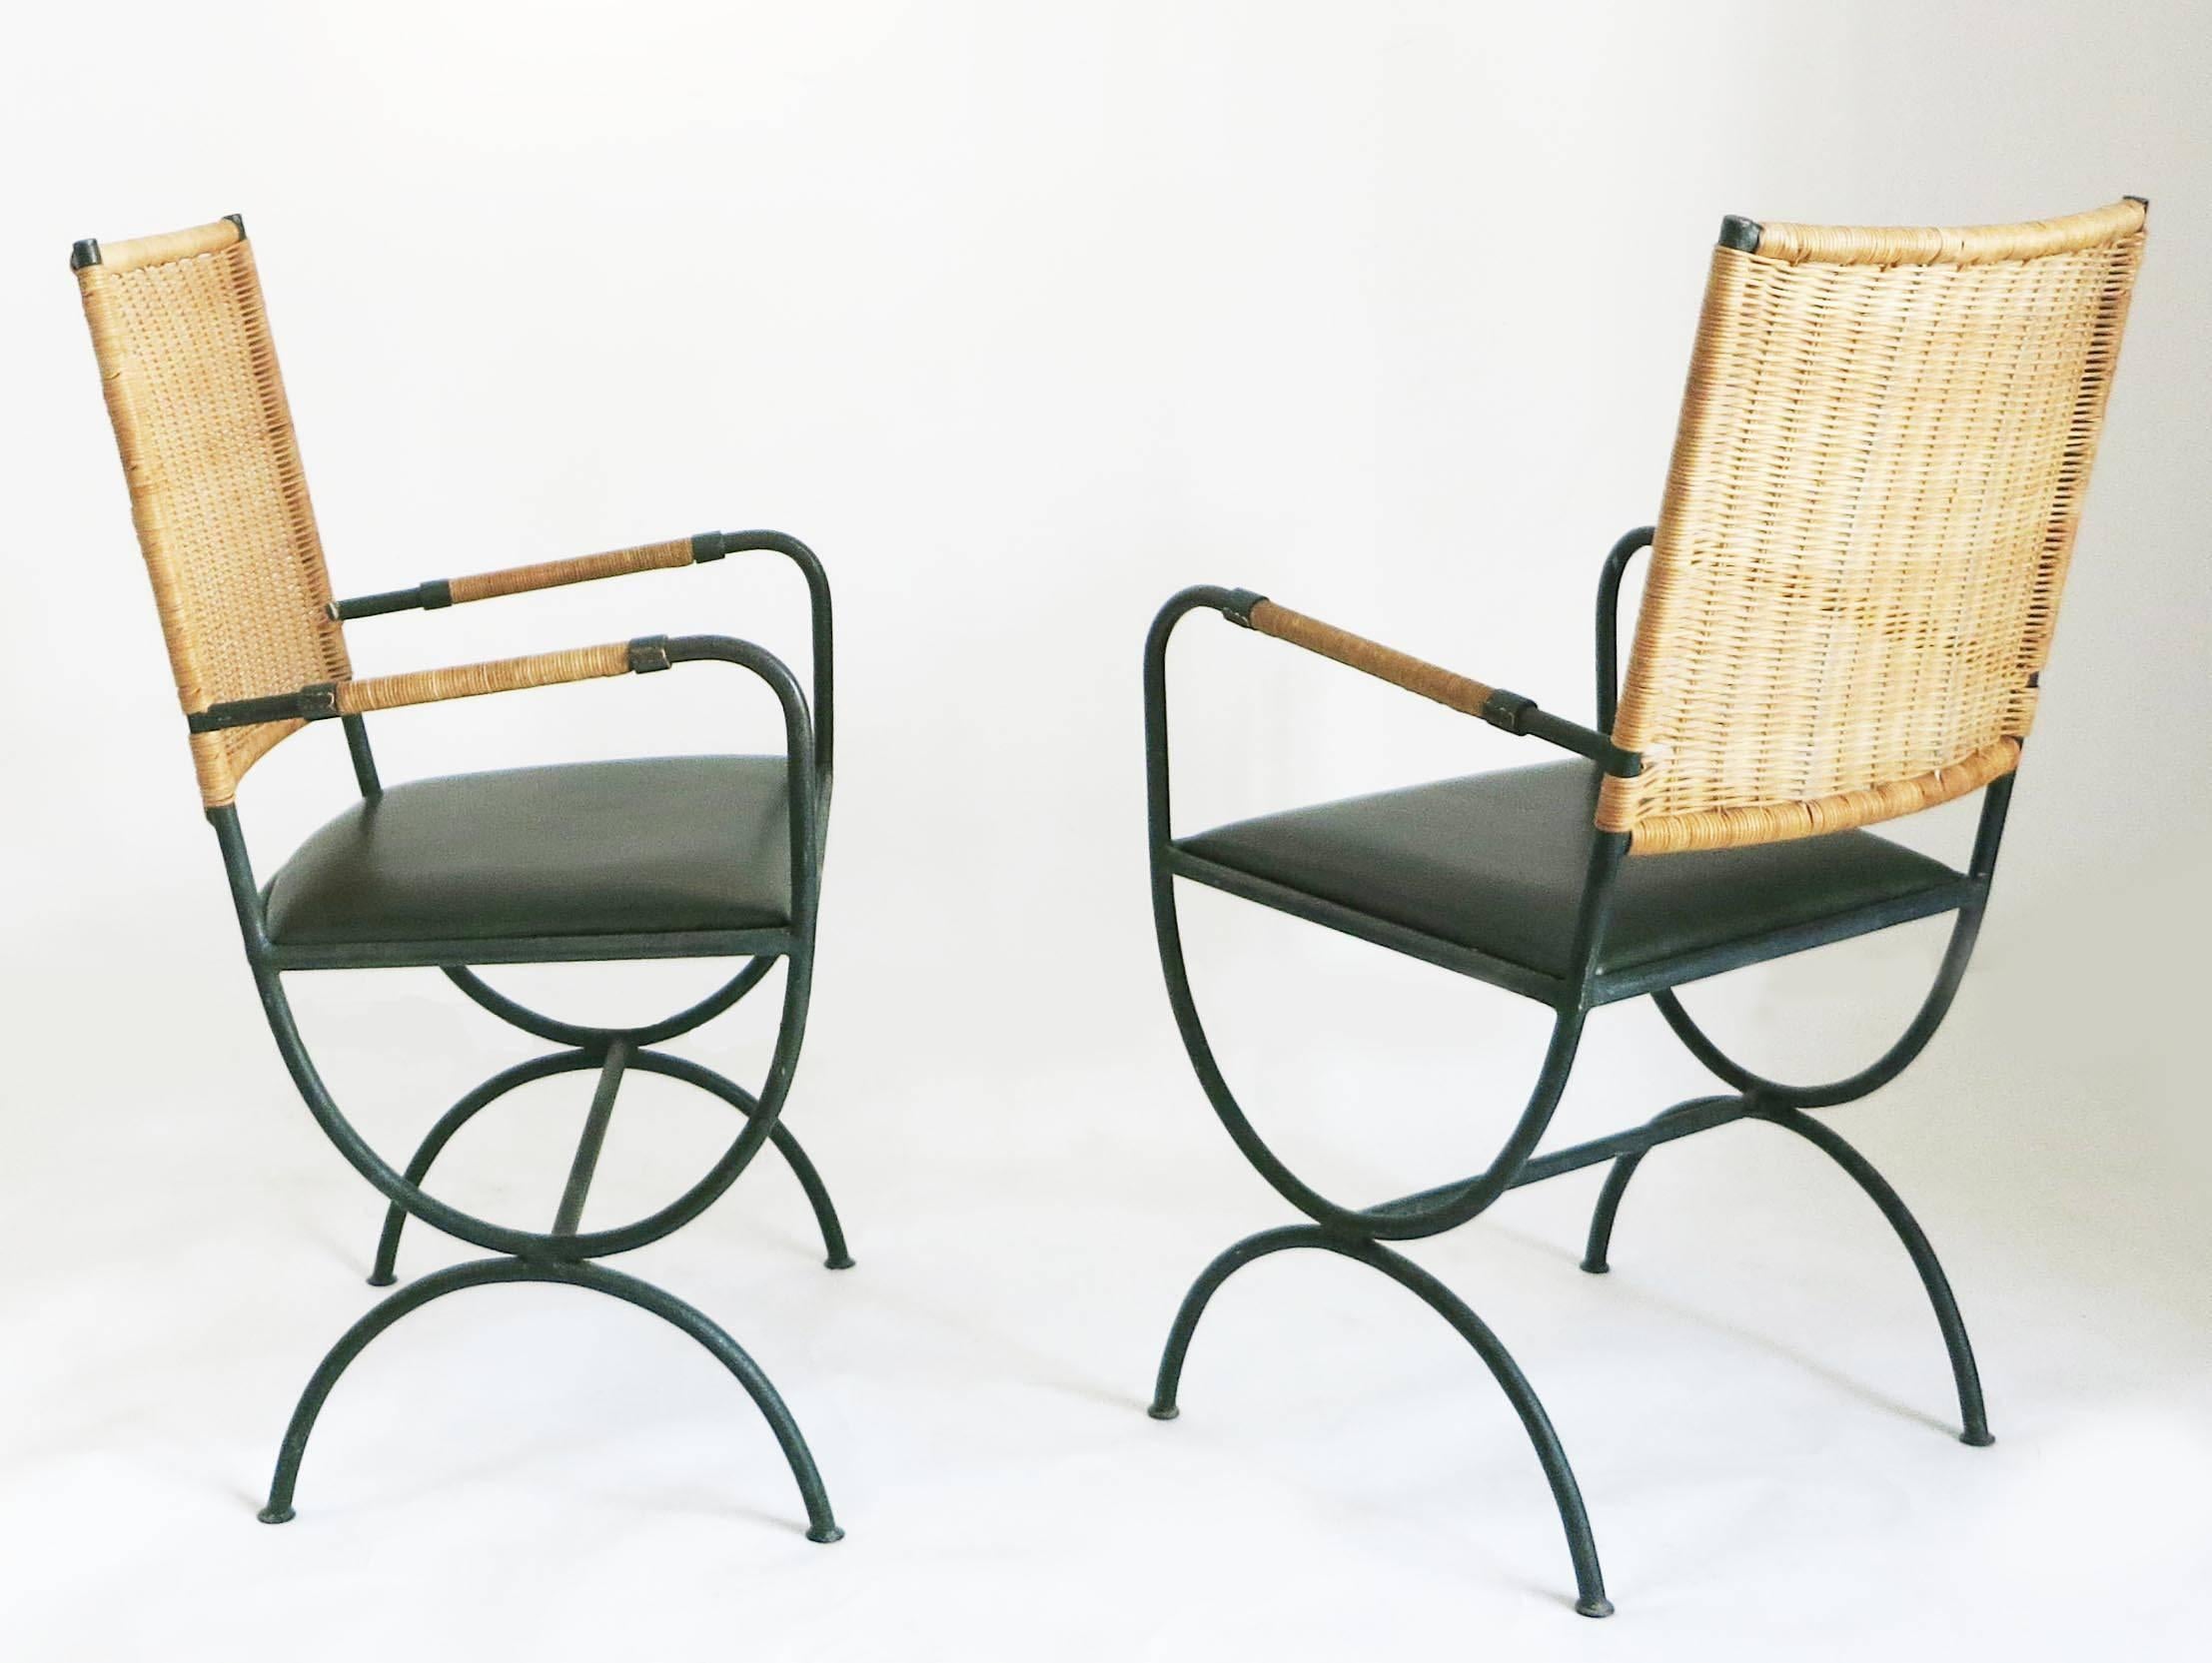 Painted Pair of Jacques Adnet Chairs, Wicker, Leather and Iron, 1950s